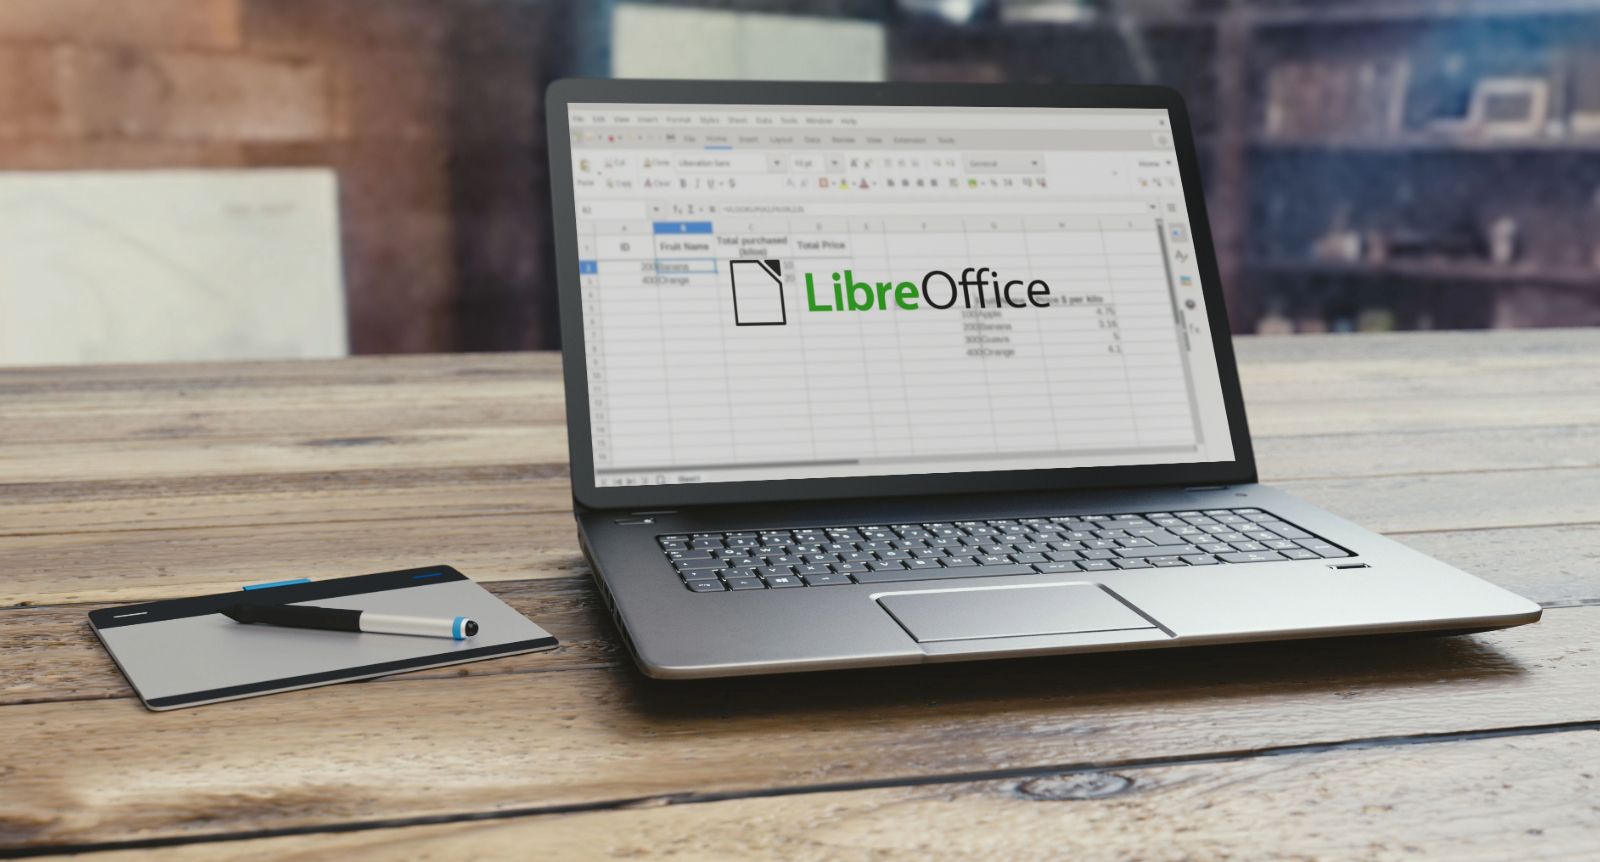 Image showing a laptop placed on a wooden table with LibreOffice open on it.